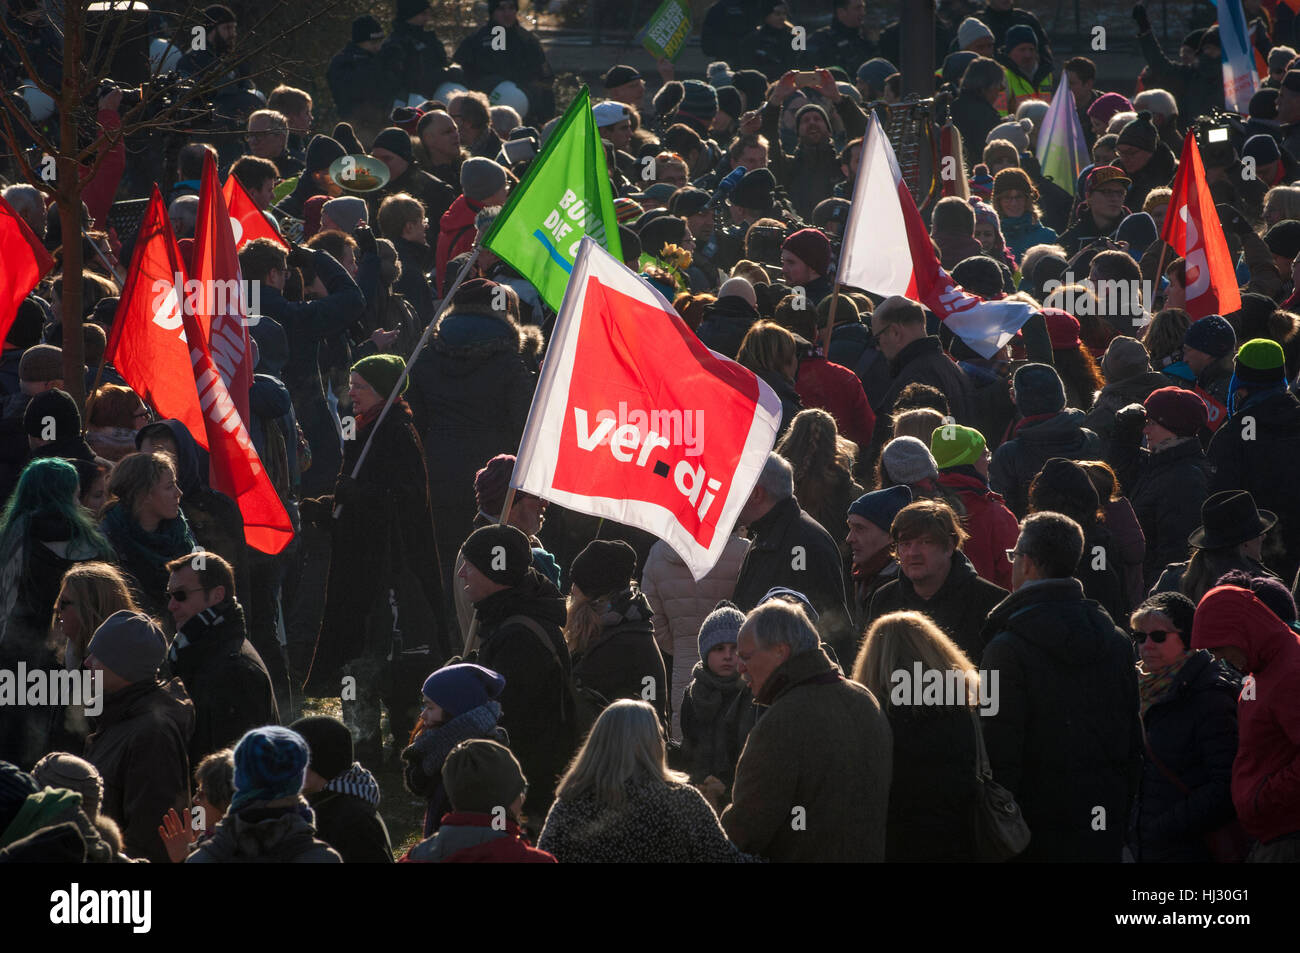 Some 3 thousand demonstrators gathered in Koblenz, Germany to protest against the gathering of Europe's far right. Stock Photo